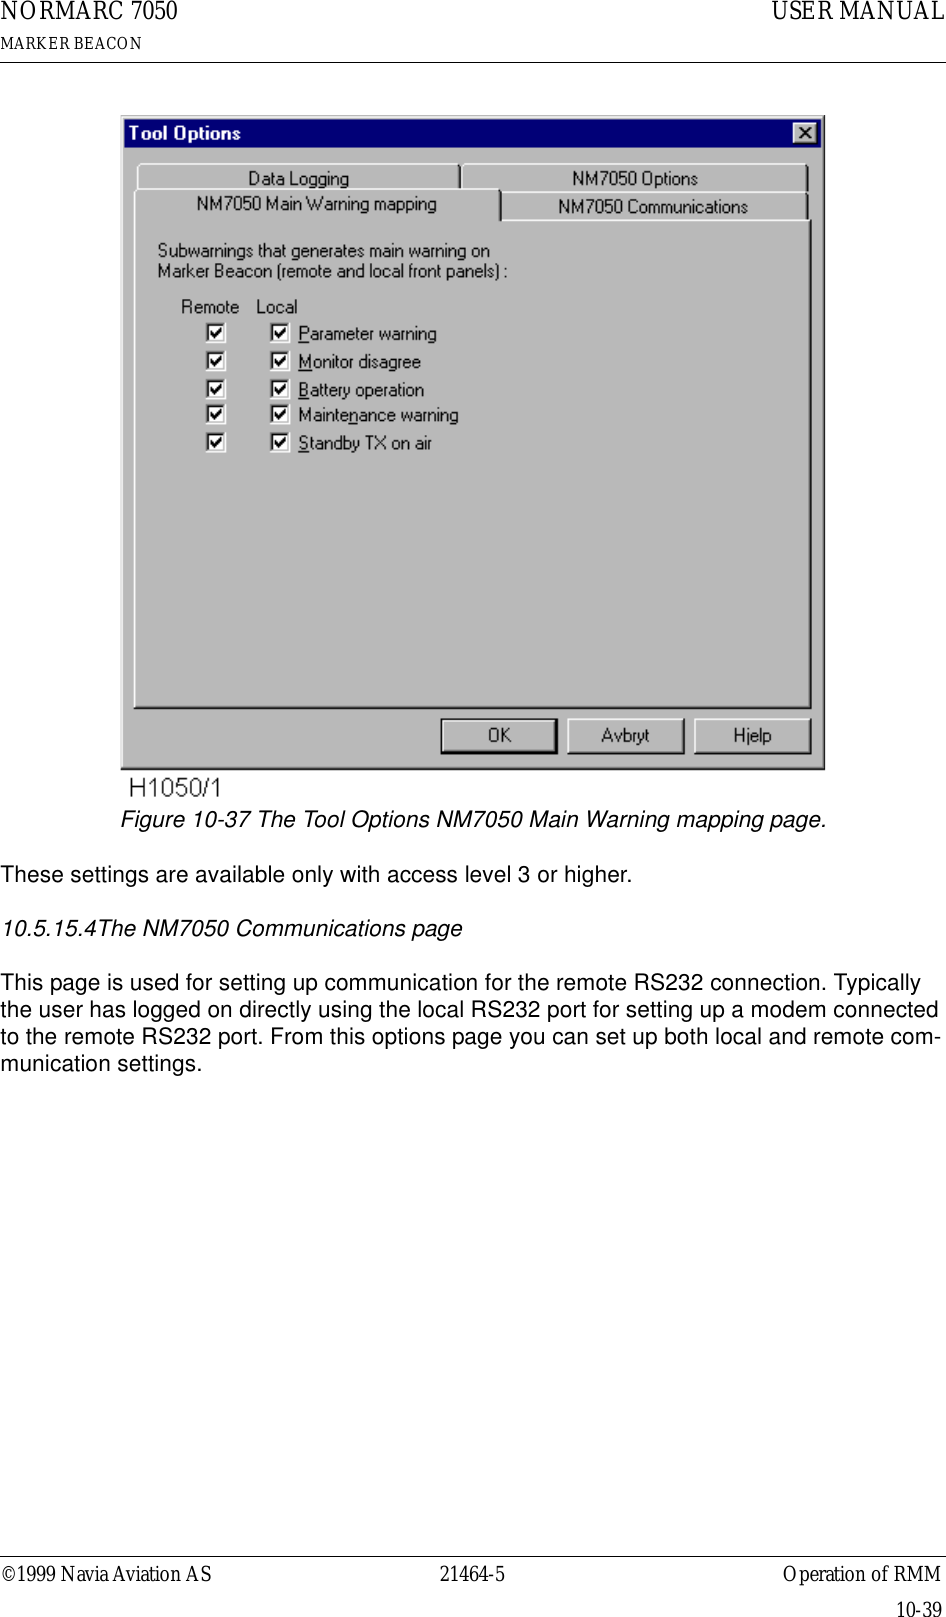 ©1999 Navia Aviation AS 21464-5 Operation of RMMUSER MANUALNORMARC 7050MARKER BEACON10-39Figure 10-37 The Tool Options NM7050 Main Warning mapping page.These settings are available only with access level 3 or higher.10.5.15.4The NM7050 Communications pageThis page is used for setting up communication for the remote RS232 connection. Typically the user has logged on directly using the local RS232 port for setting up a modem connected to the remote RS232 port. From this options page you can set up both local and remote com-munication settings.